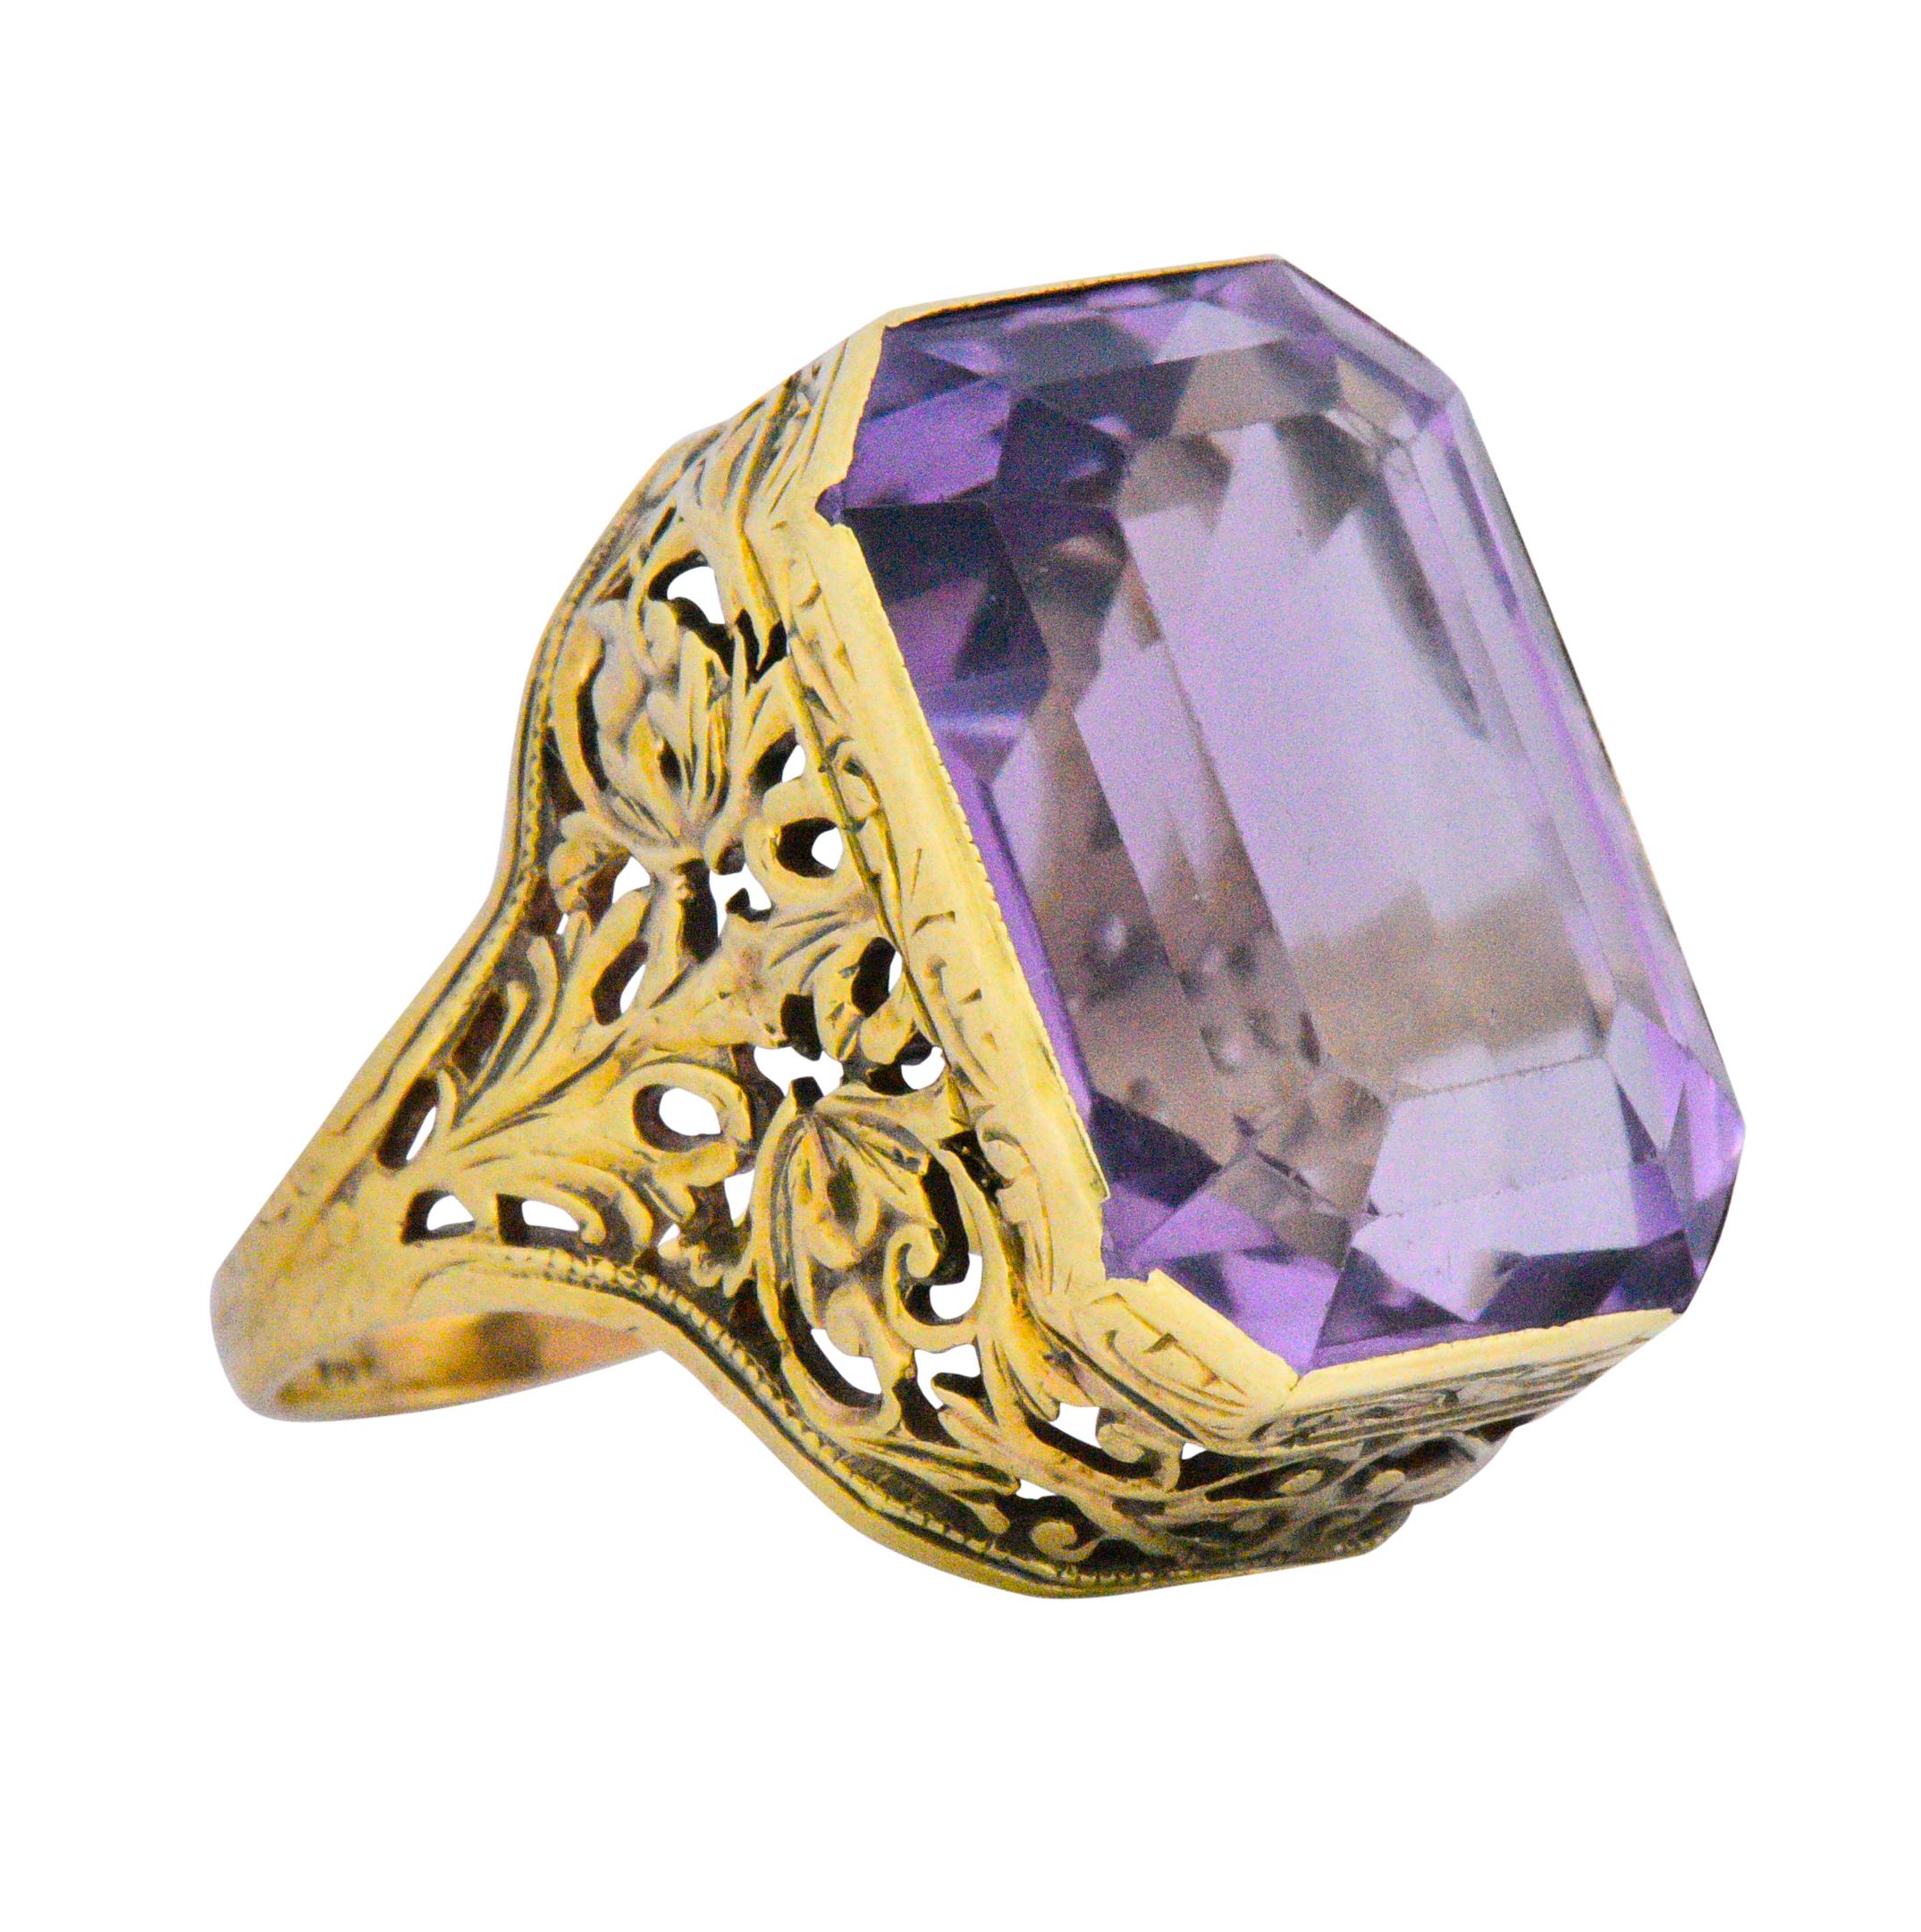 Centering a emerald cut amethyst weighing approximately 14.00 carats total, lovely light bright even purple

The amethyst is bezel set in a well, simply stunning pierced filigree gallery, with scrolling a foliate motif details 

The perfect cocktail